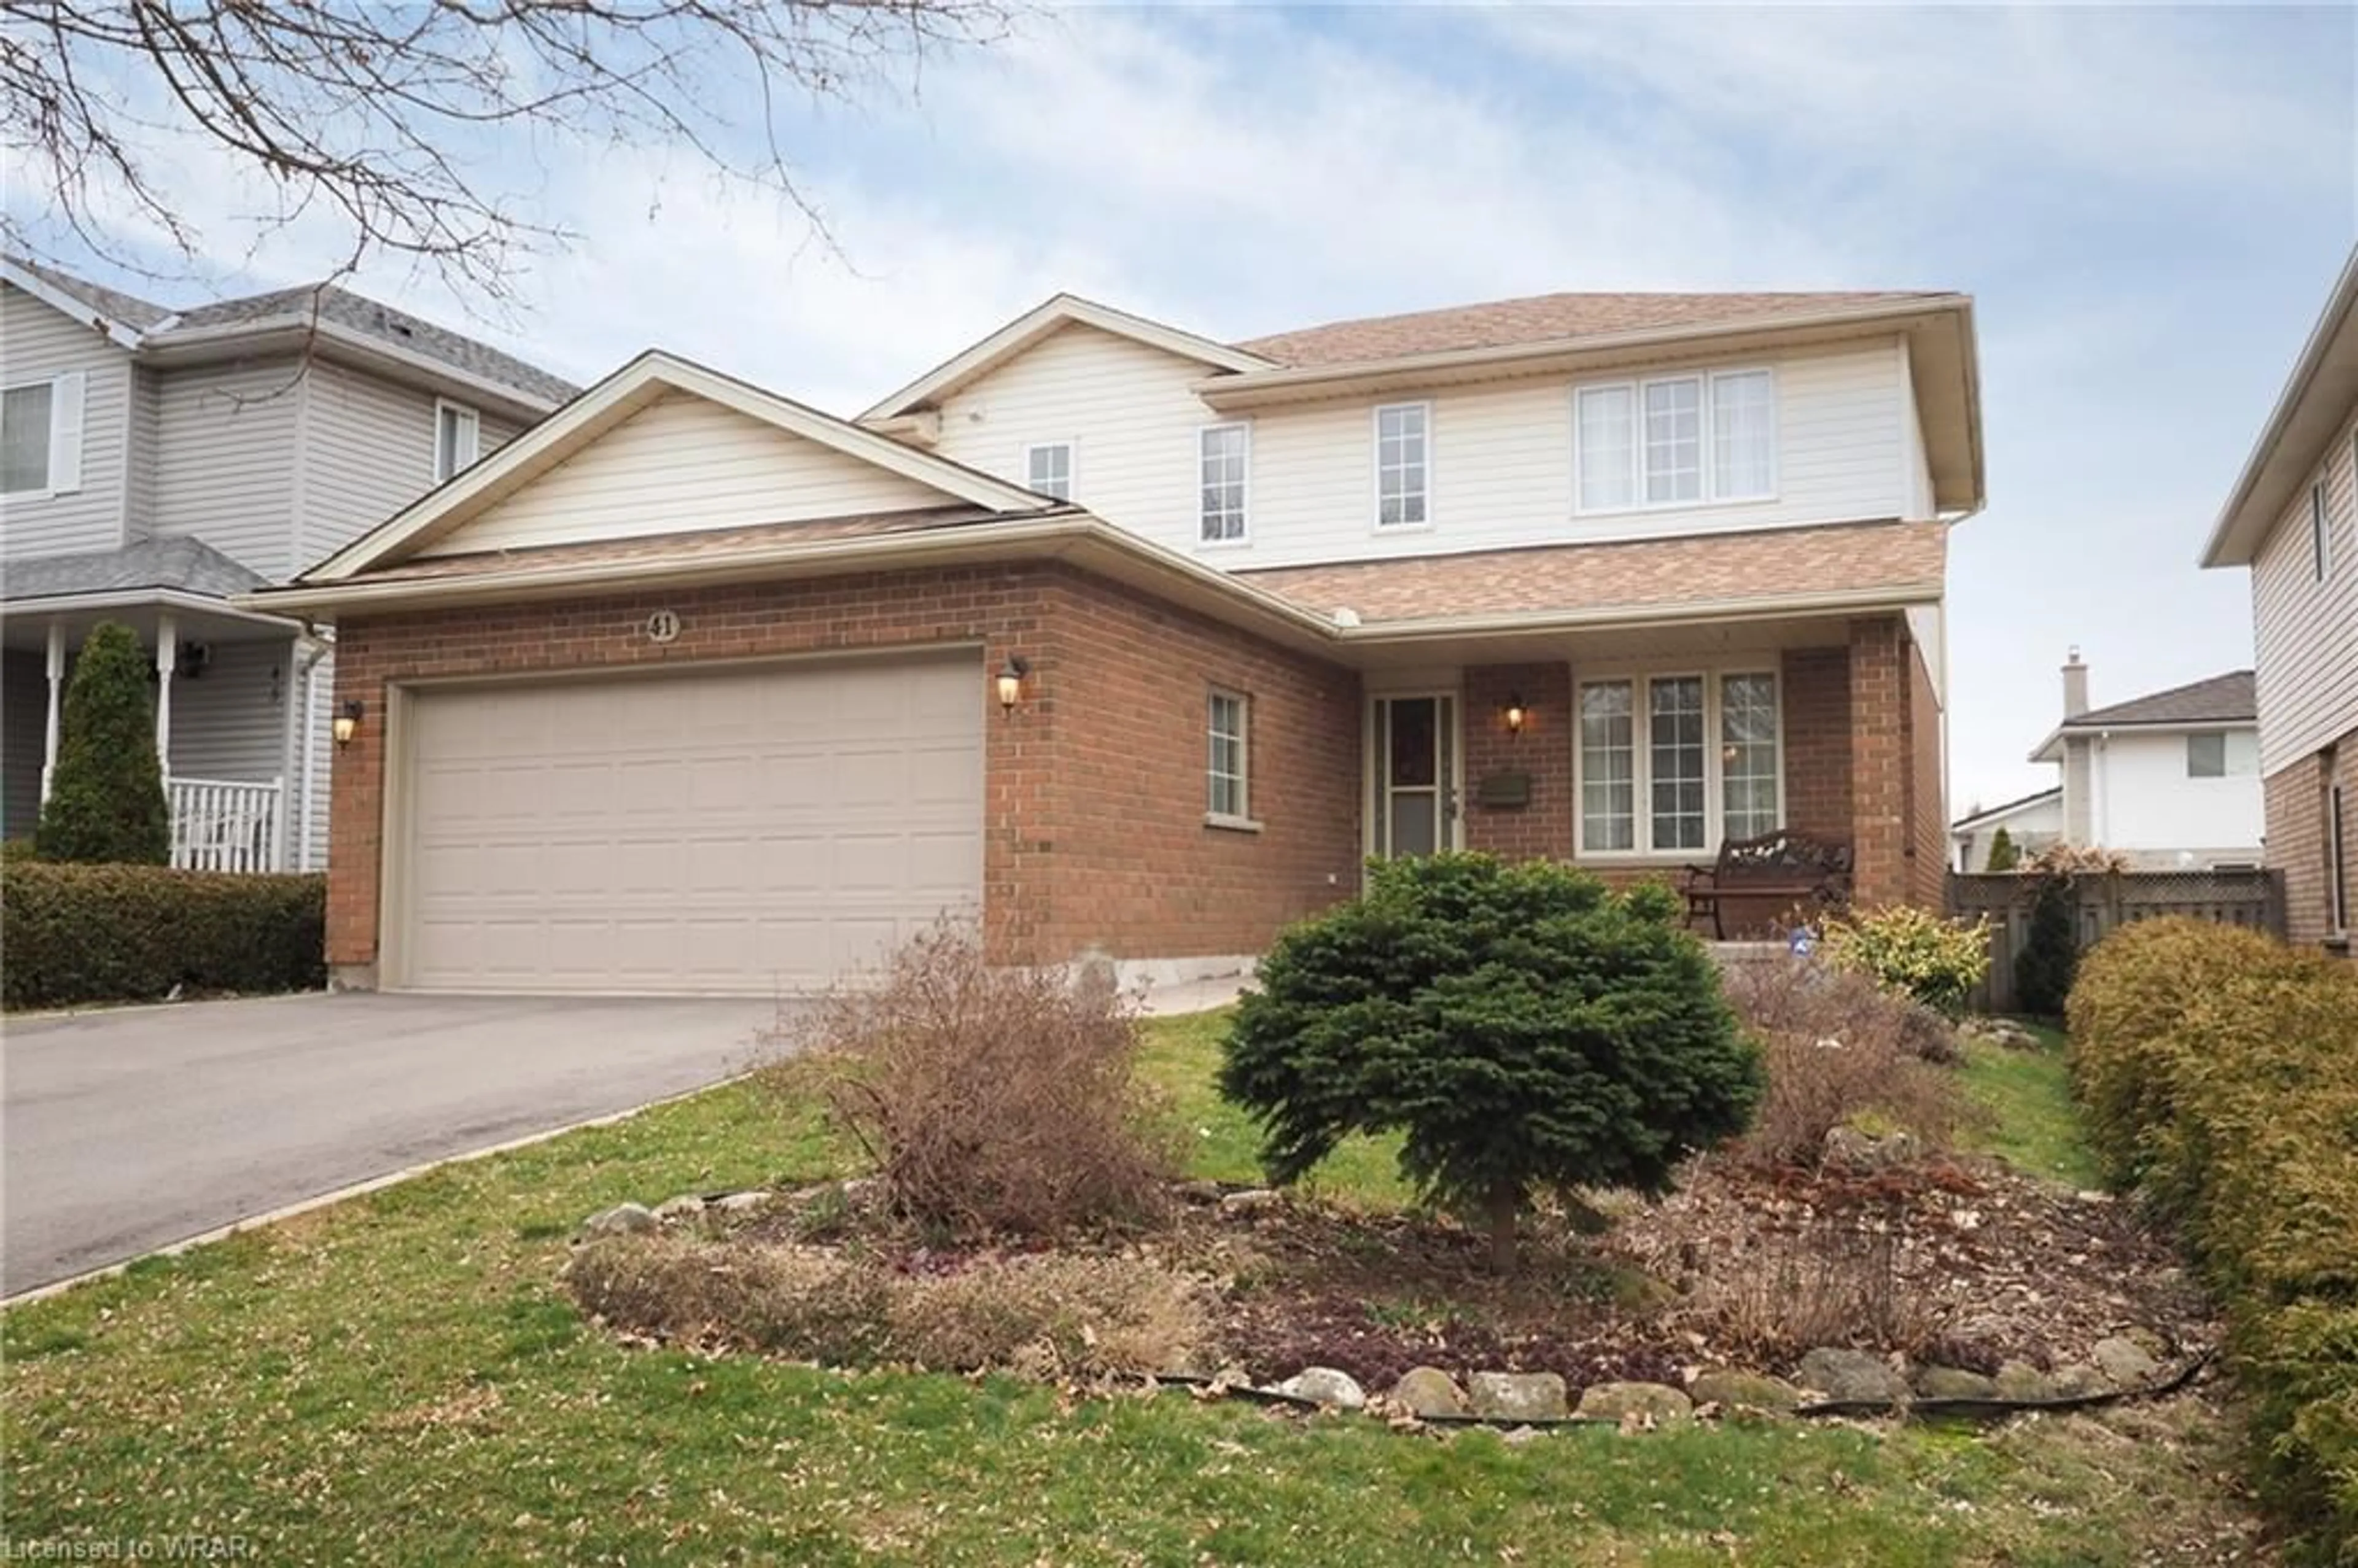 Home with brick exterior material for 41 Biehn Dr, Kitchener Ontario N2R 1L8